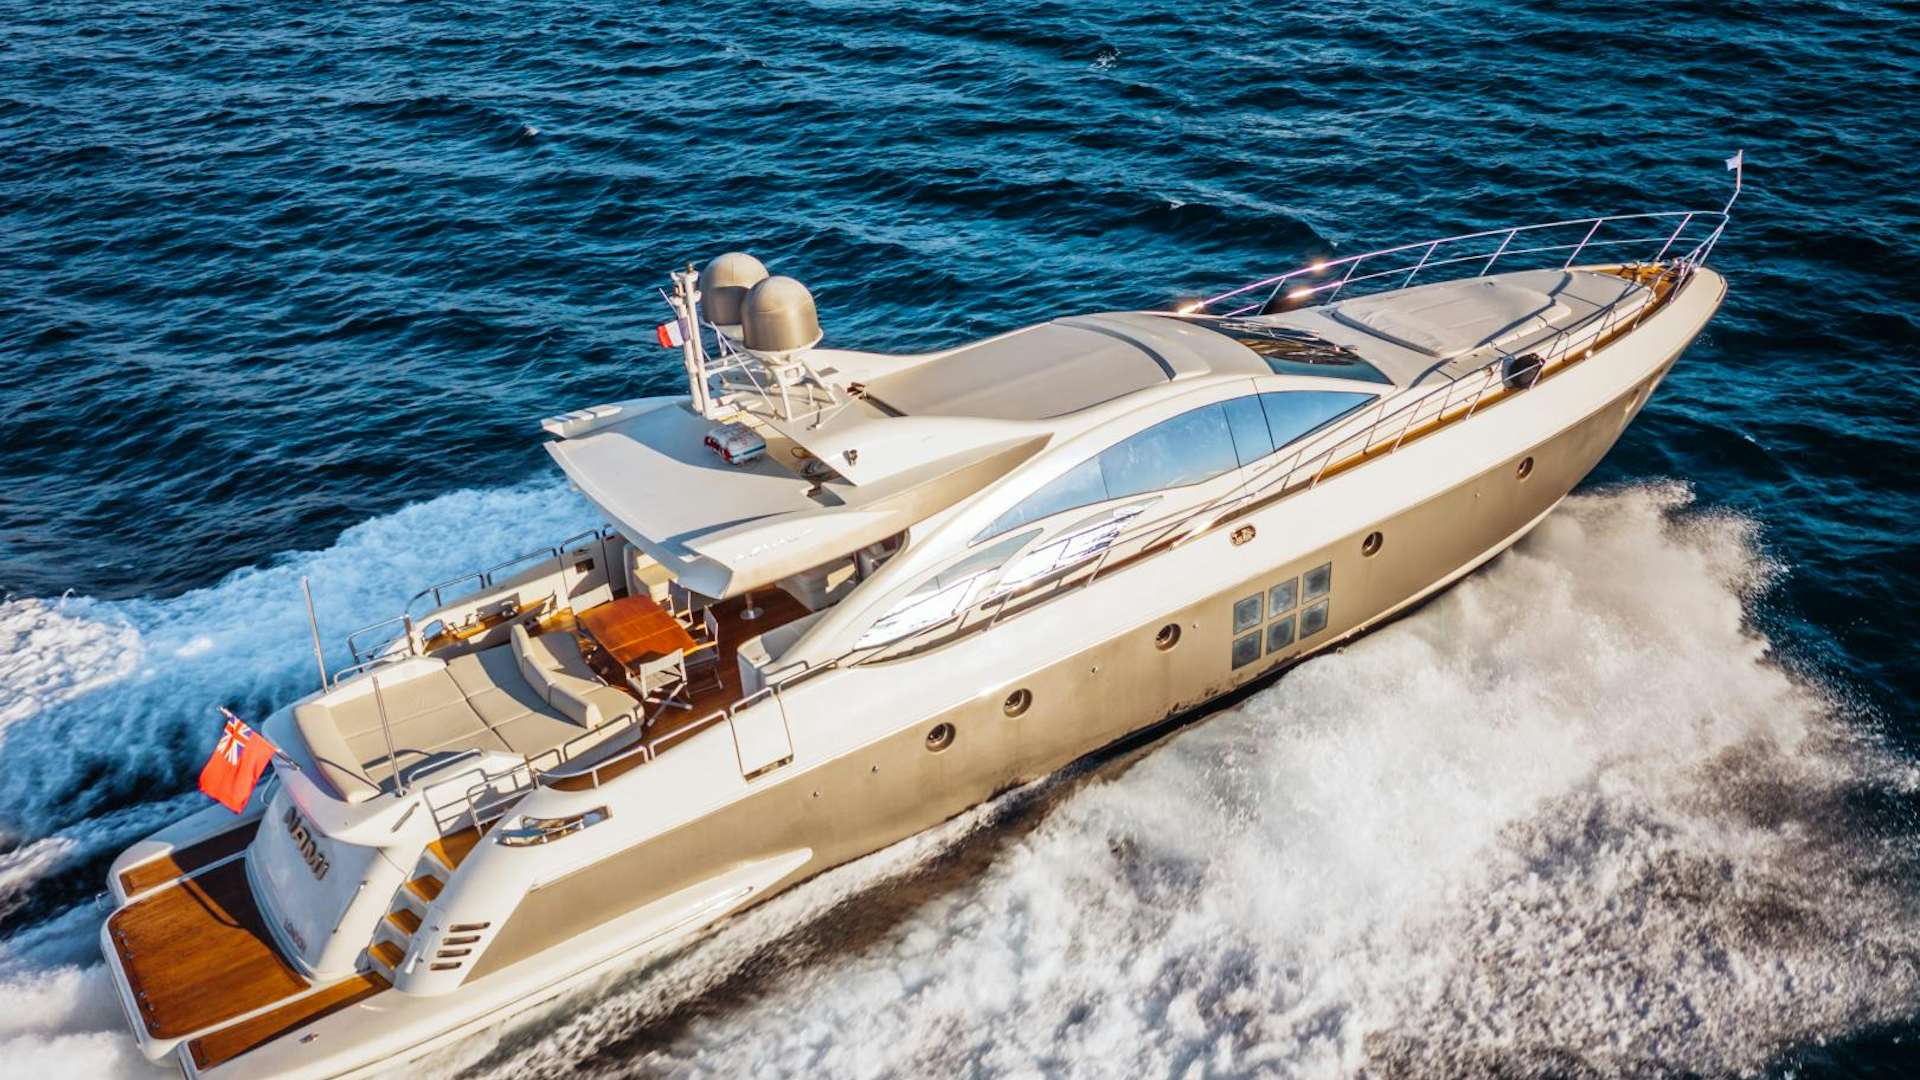 Nami
Yacht for Sale